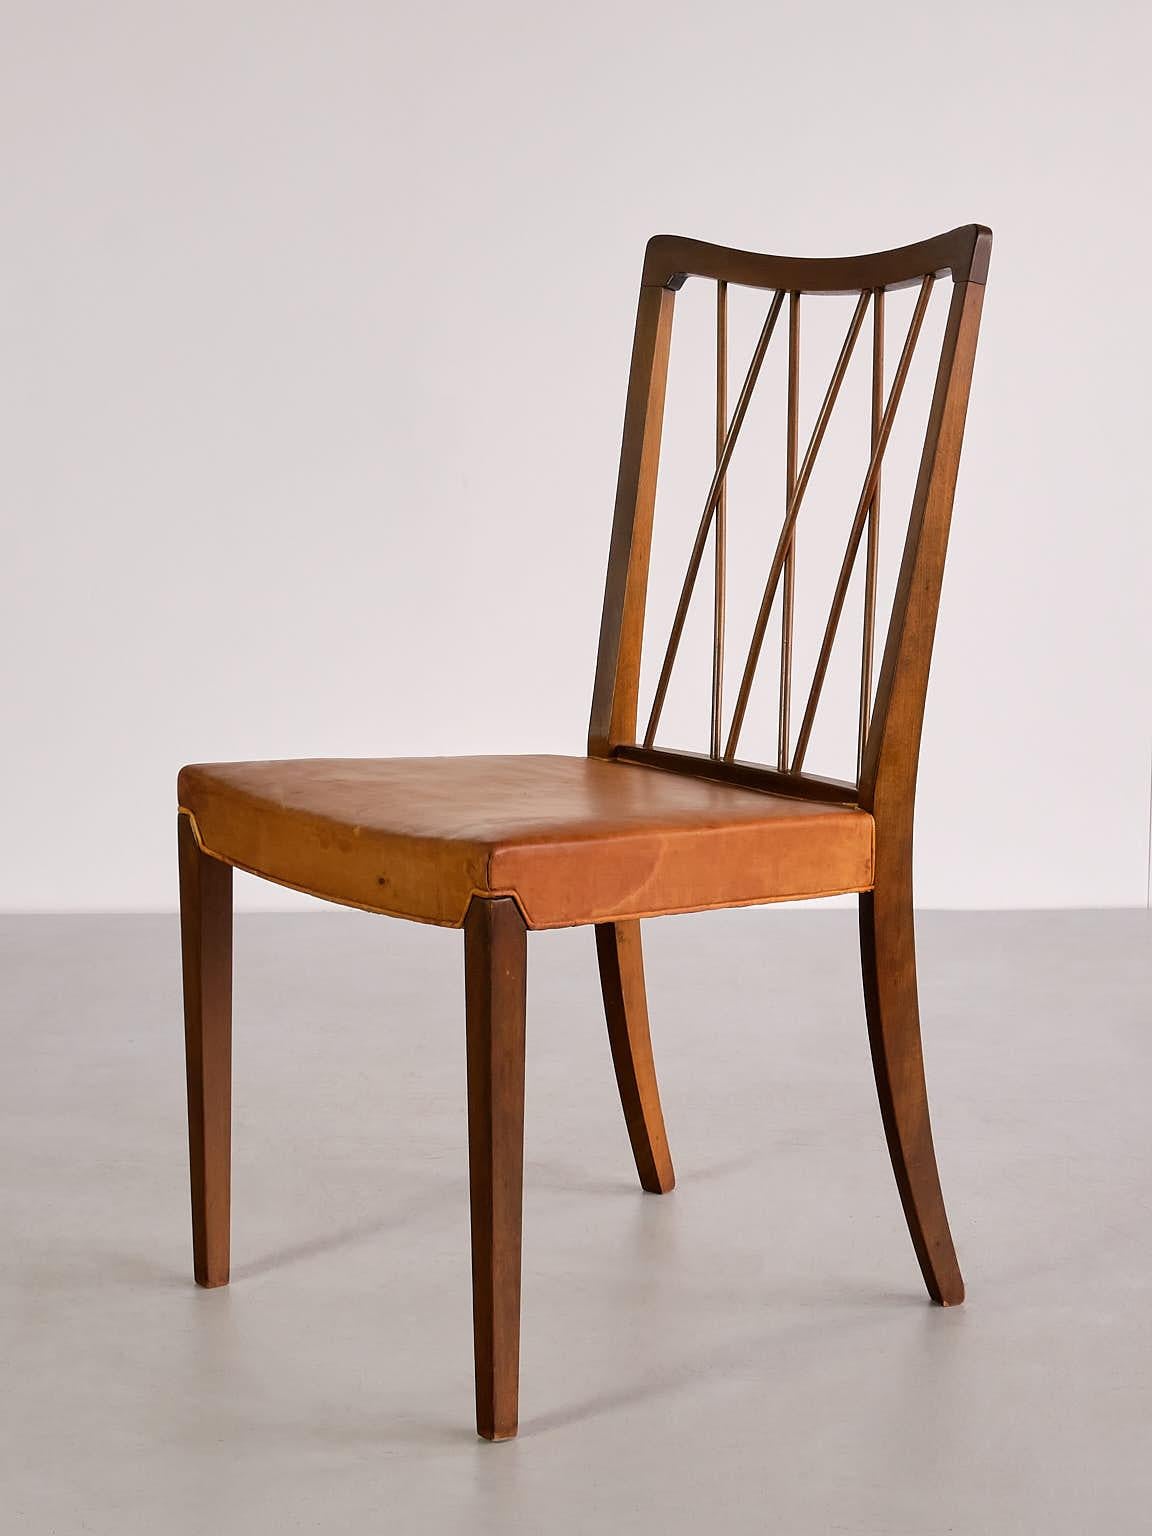 Set of Eight Frode Holm Dining Chairs, Walnut and Leather, Illum, Denmark, 1940s For Sale 13